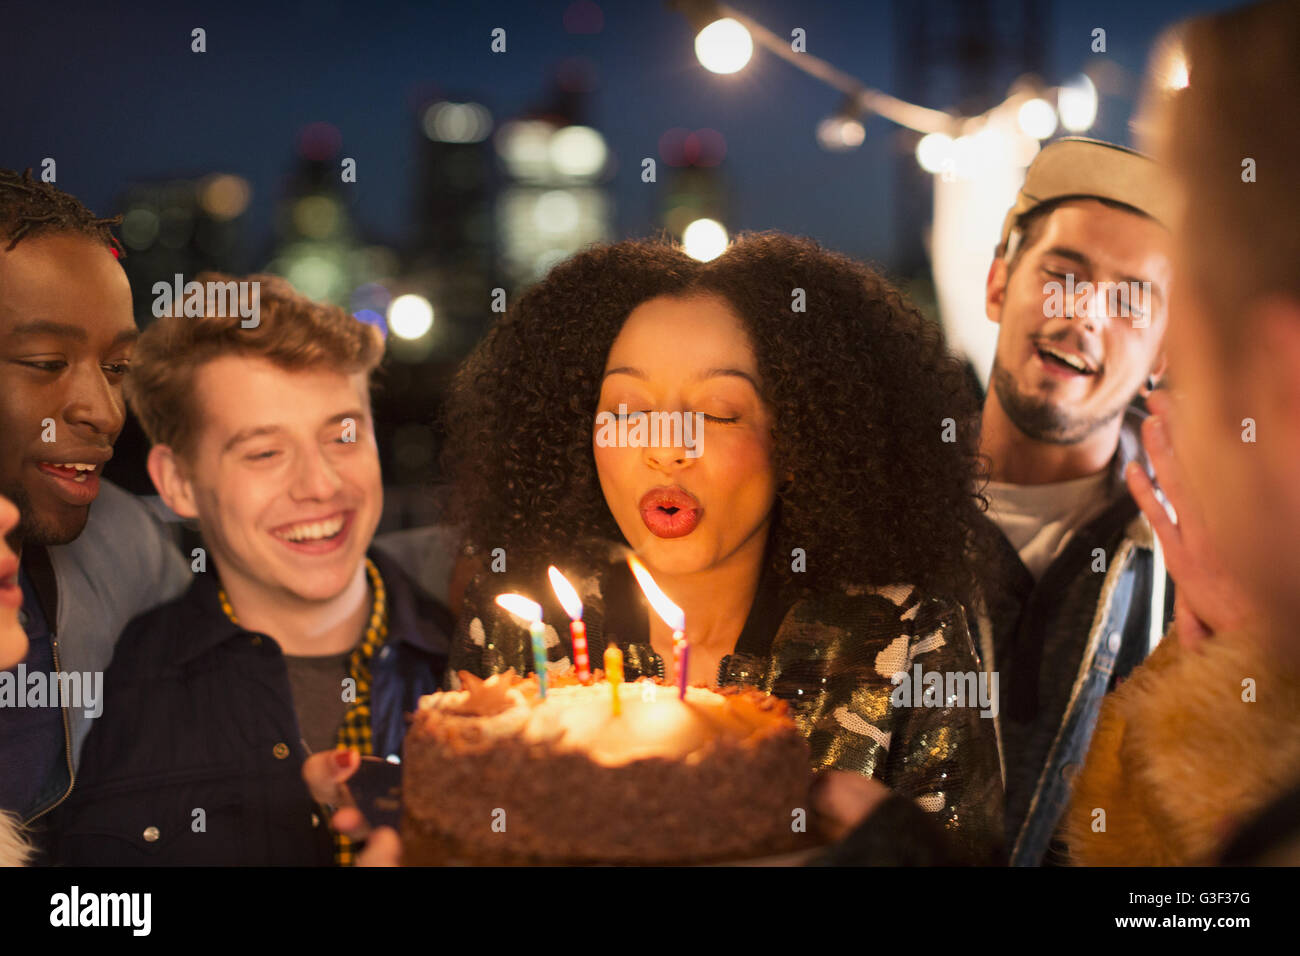 Friends cheering young woman blowing out birthday candles Stock Photo